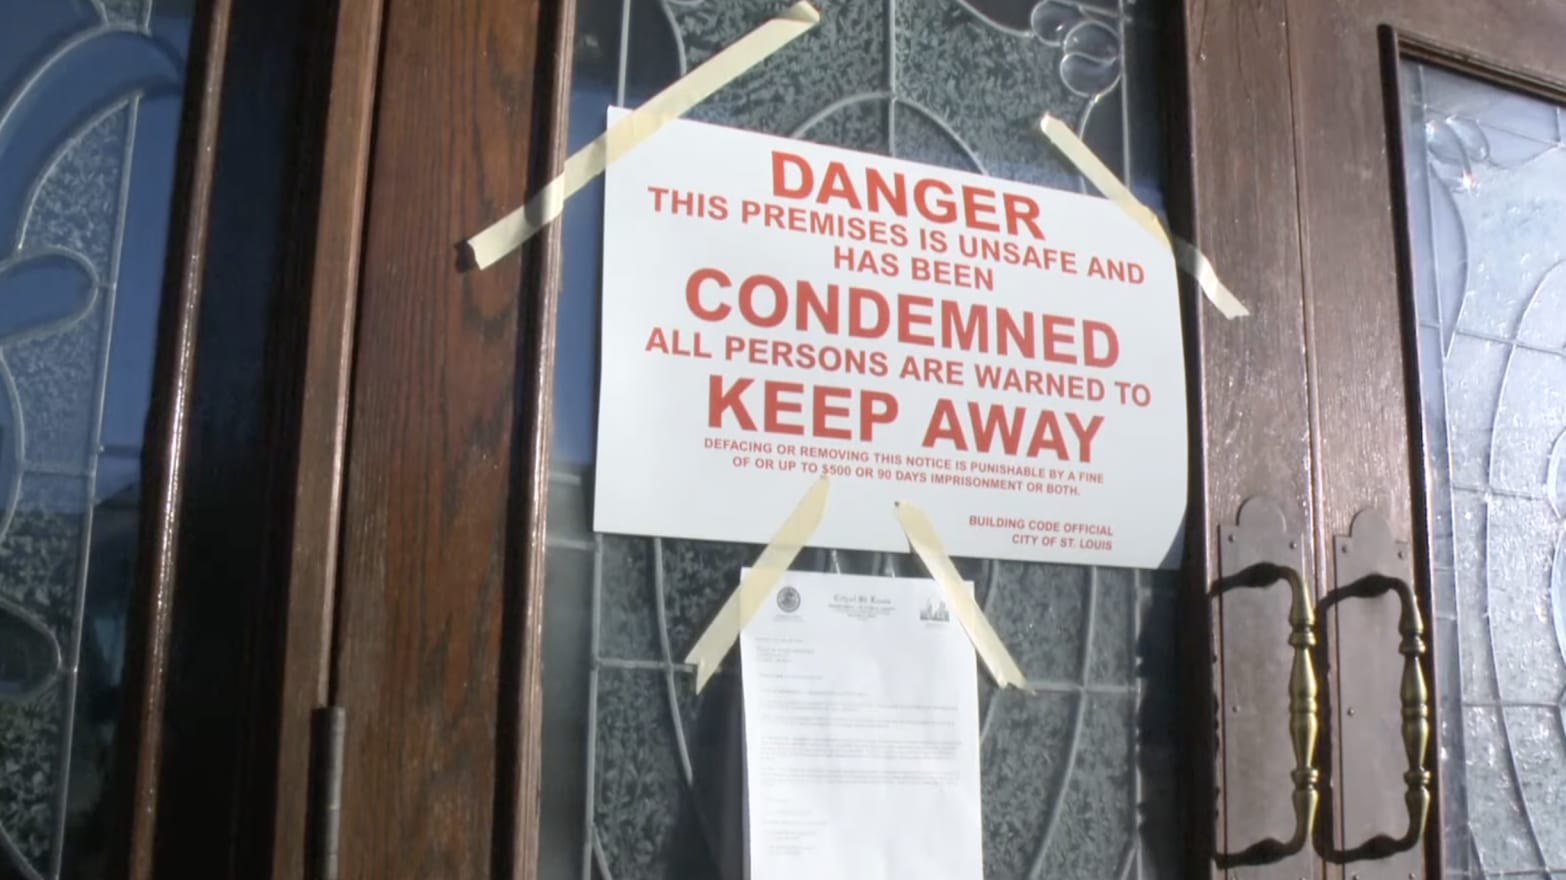 A condemnation notice is displayed at the Mount of Olives Ministry in St. Louis. 